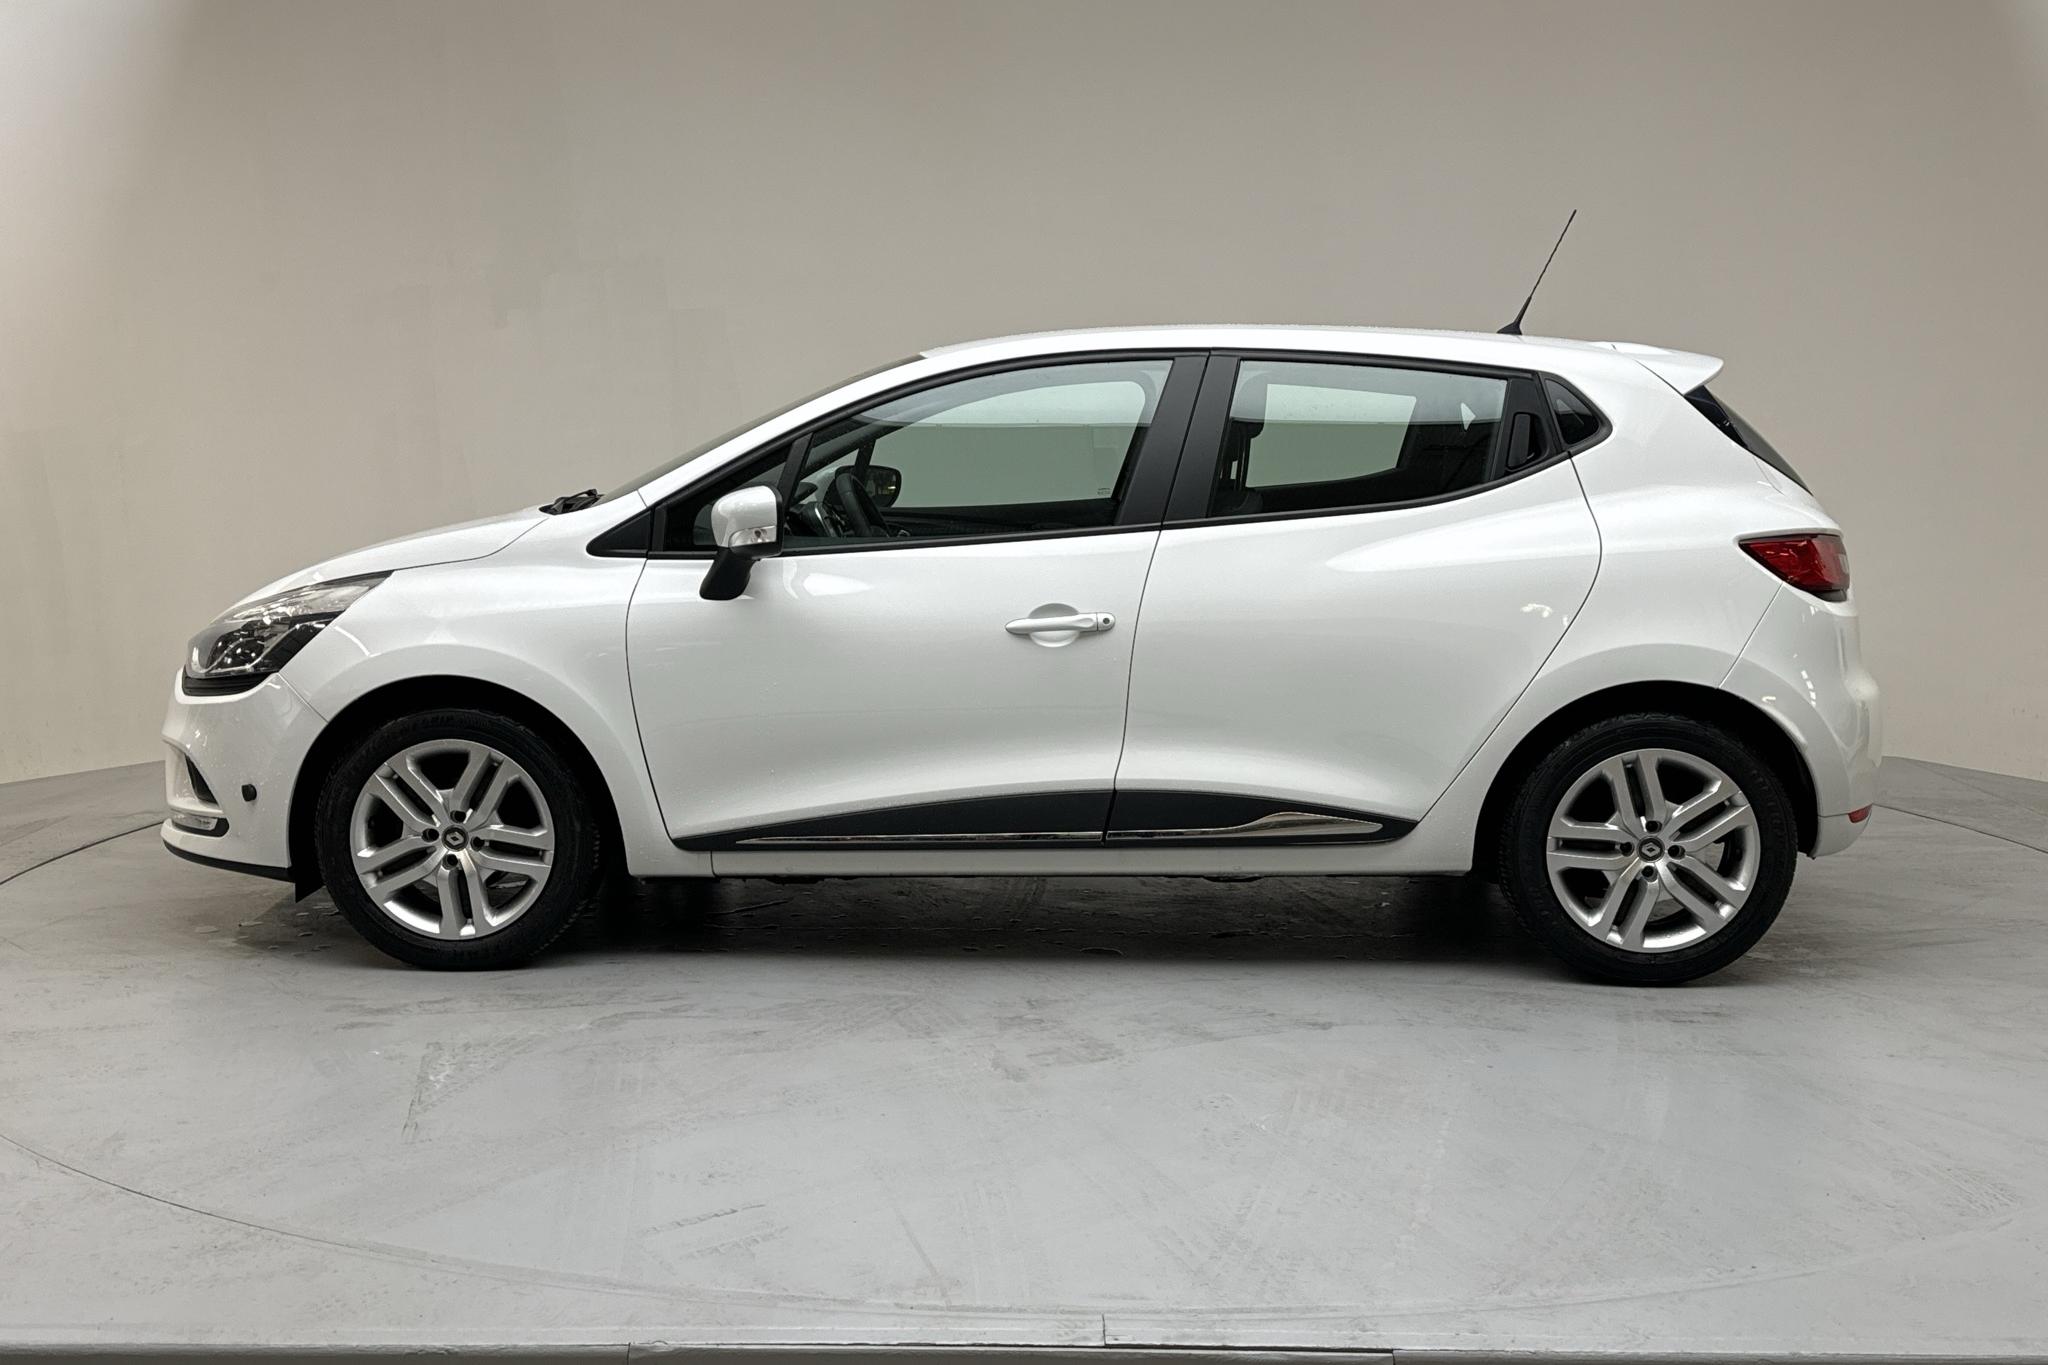 Renault Clio IV 0.9 TCe 90 5dr (90hk) - 30 890 km - Manual - white - 2018